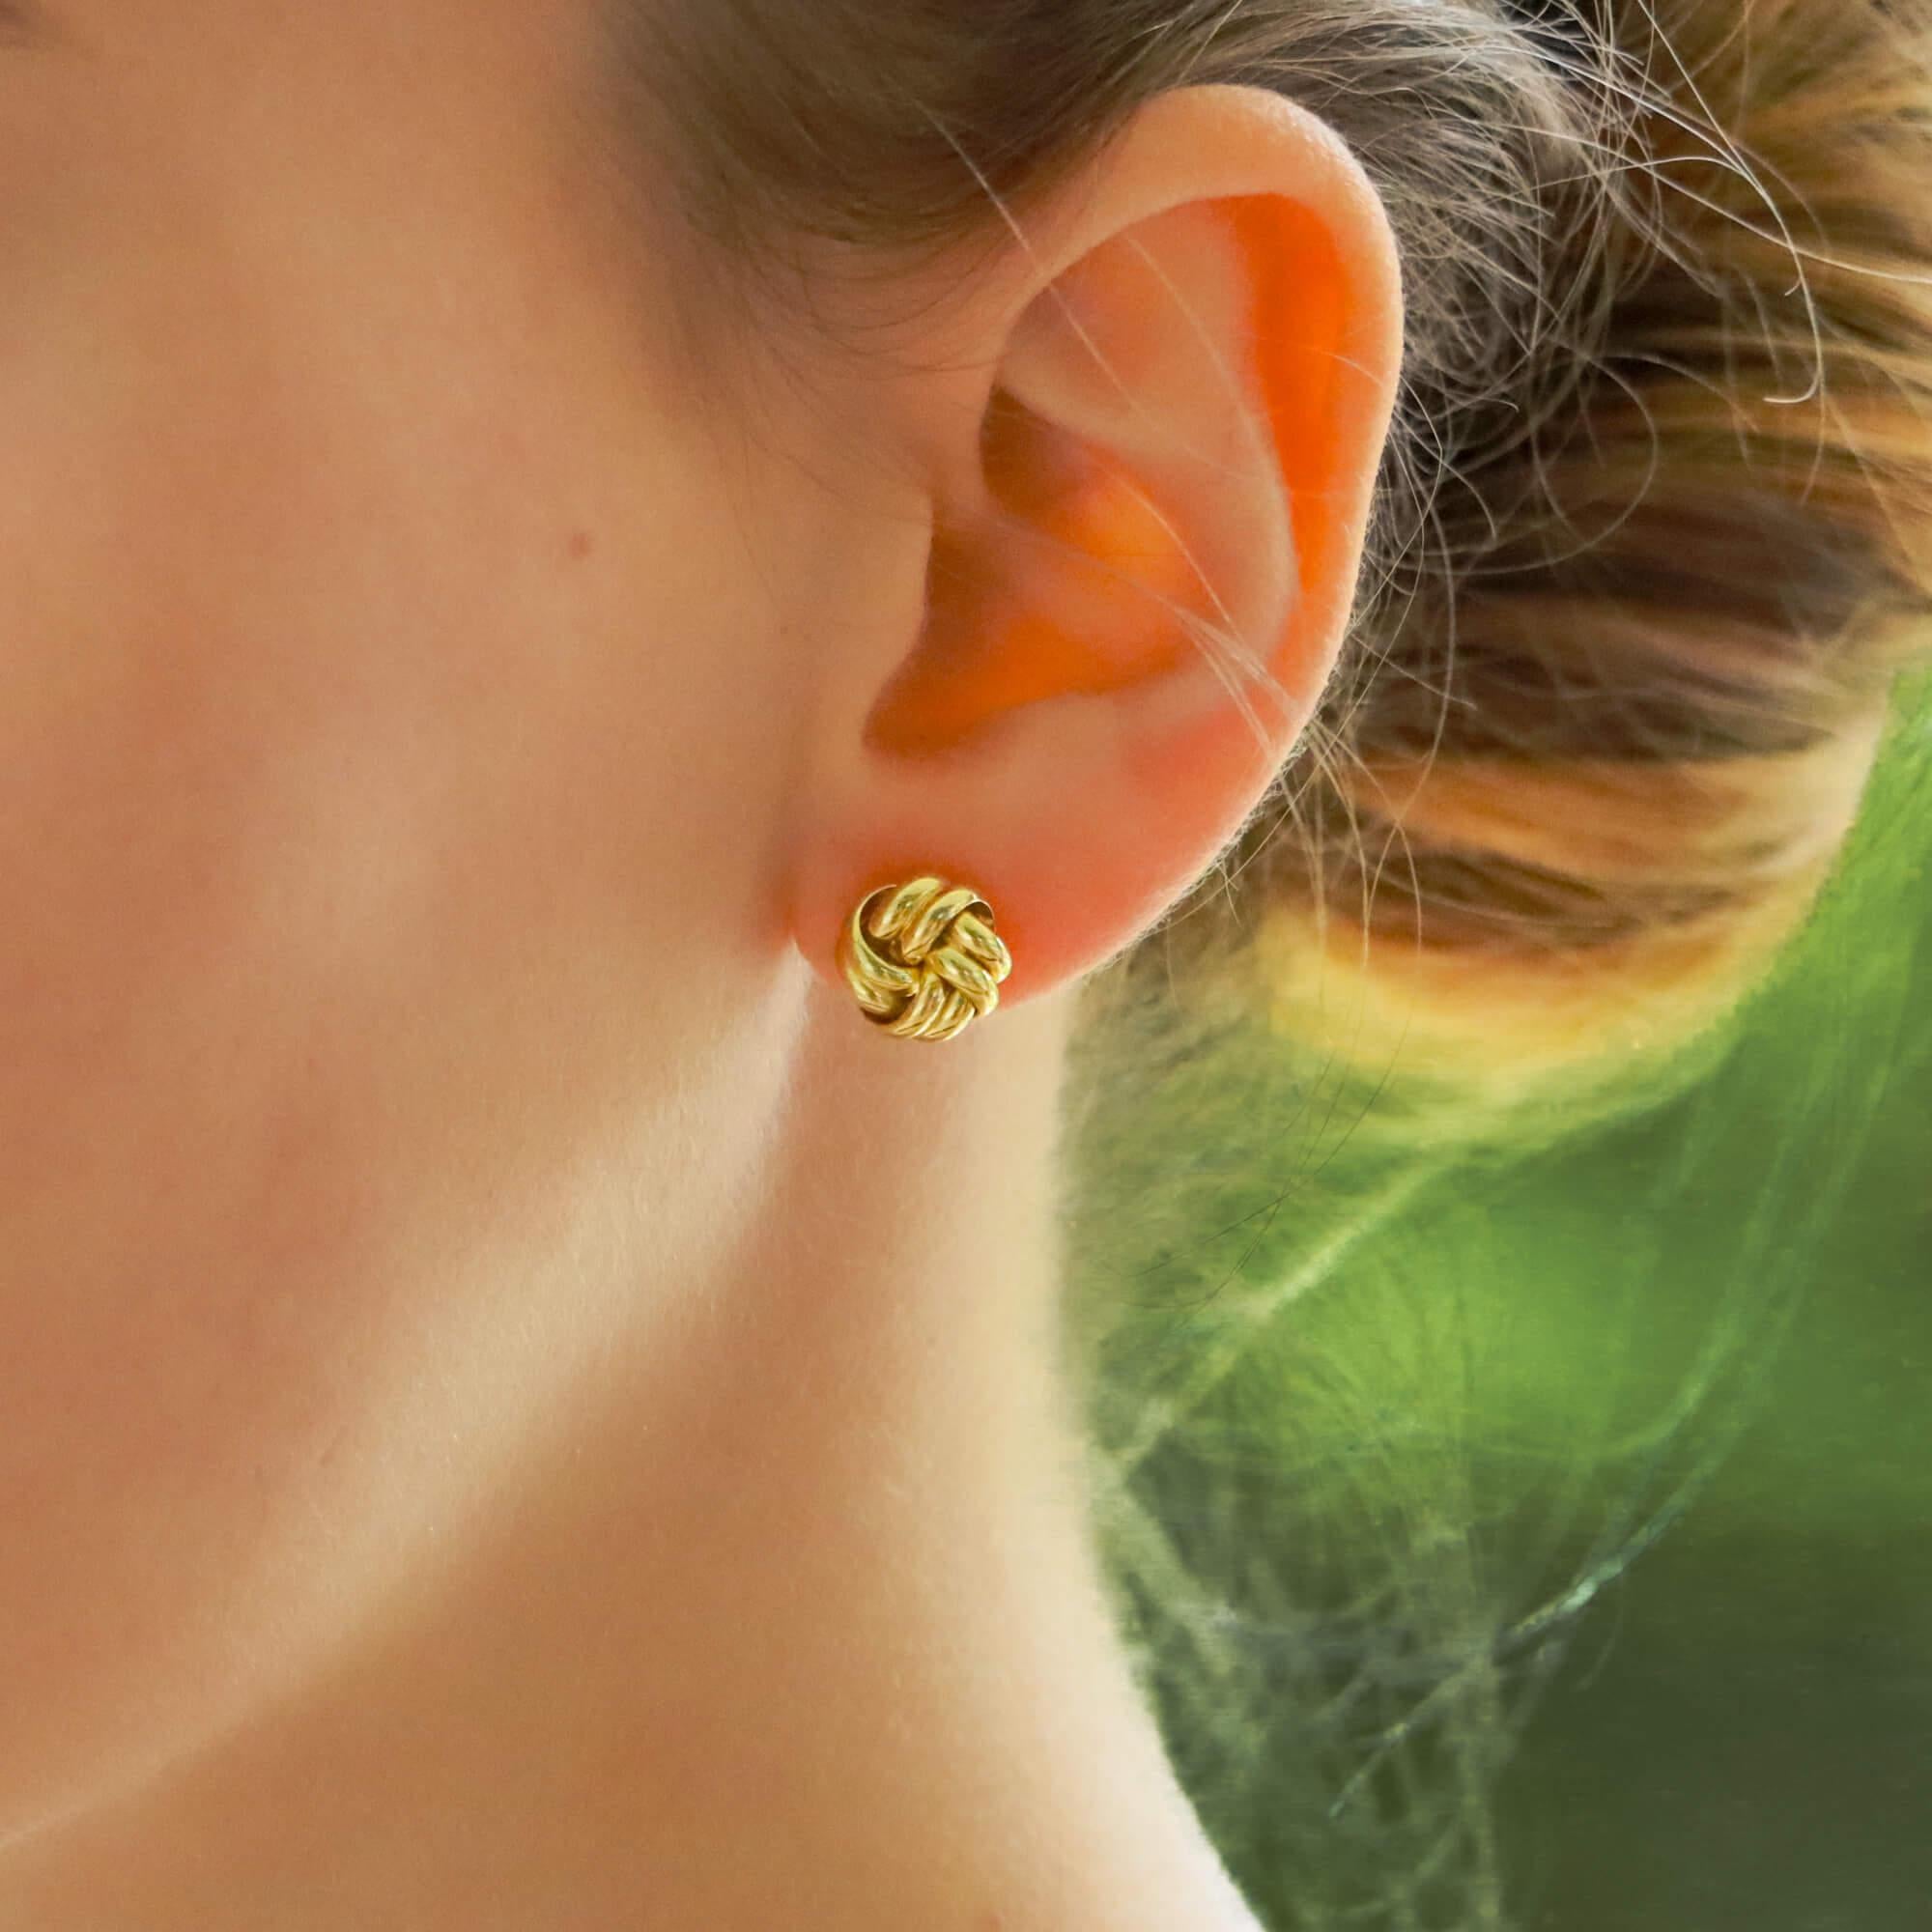  A fabulous pair of vintage knot stud earrings set in 18k yellow gold.

Each earrings depicts and double stranded woven knot and each are secured to reverse with a solid gold post and butterfly fitting.

Due to the design and size, these earrings